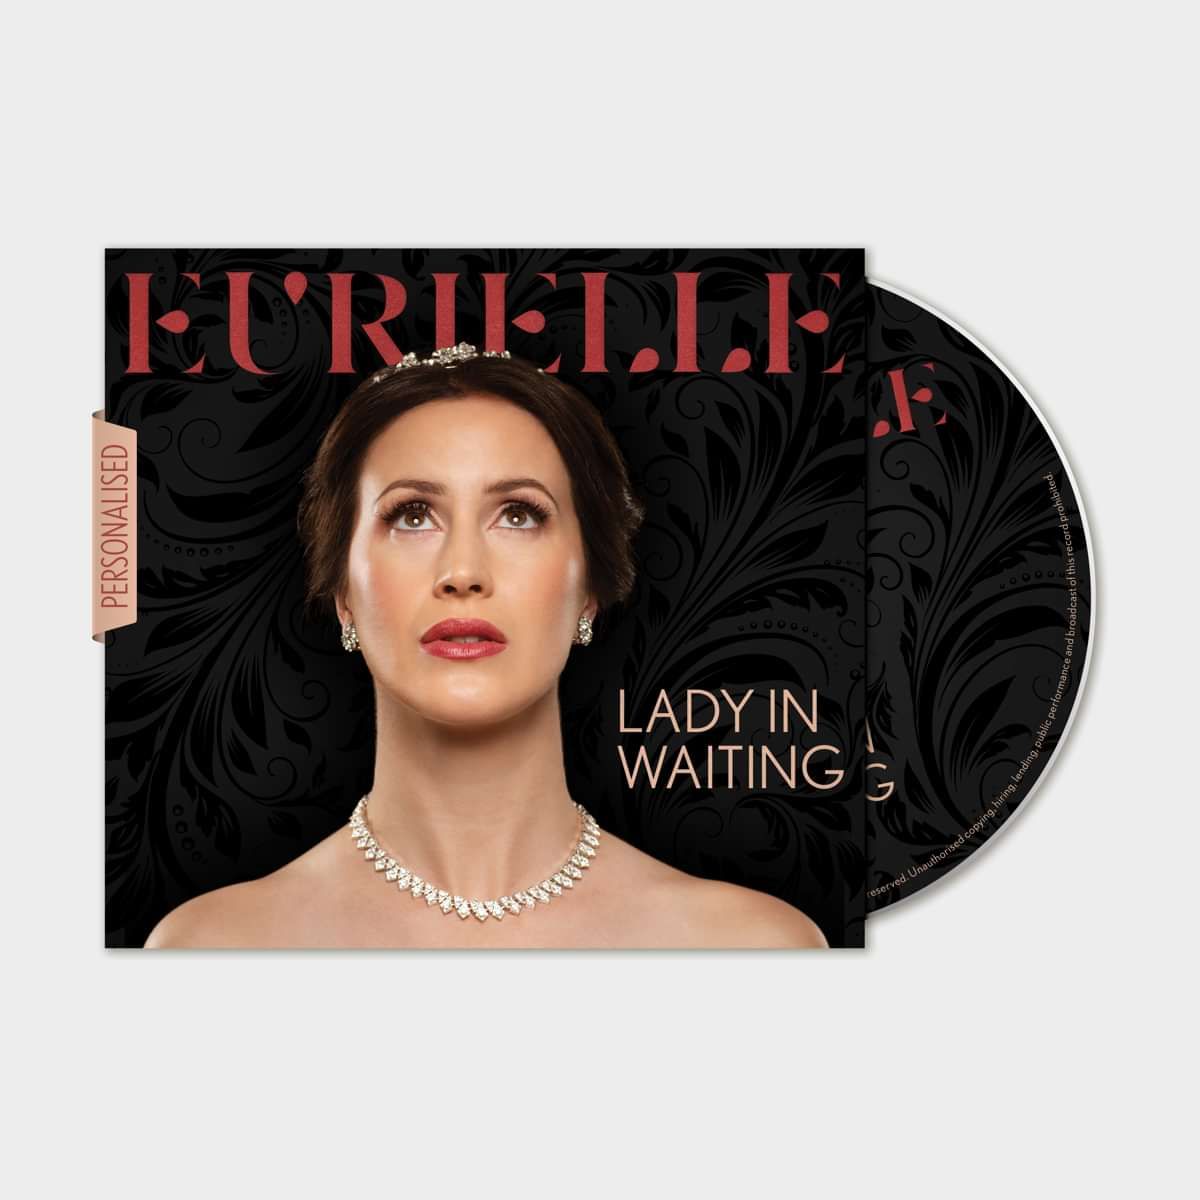 LADY IN WAITING (ALBUM CD - PERSONALISED) - Eurielle